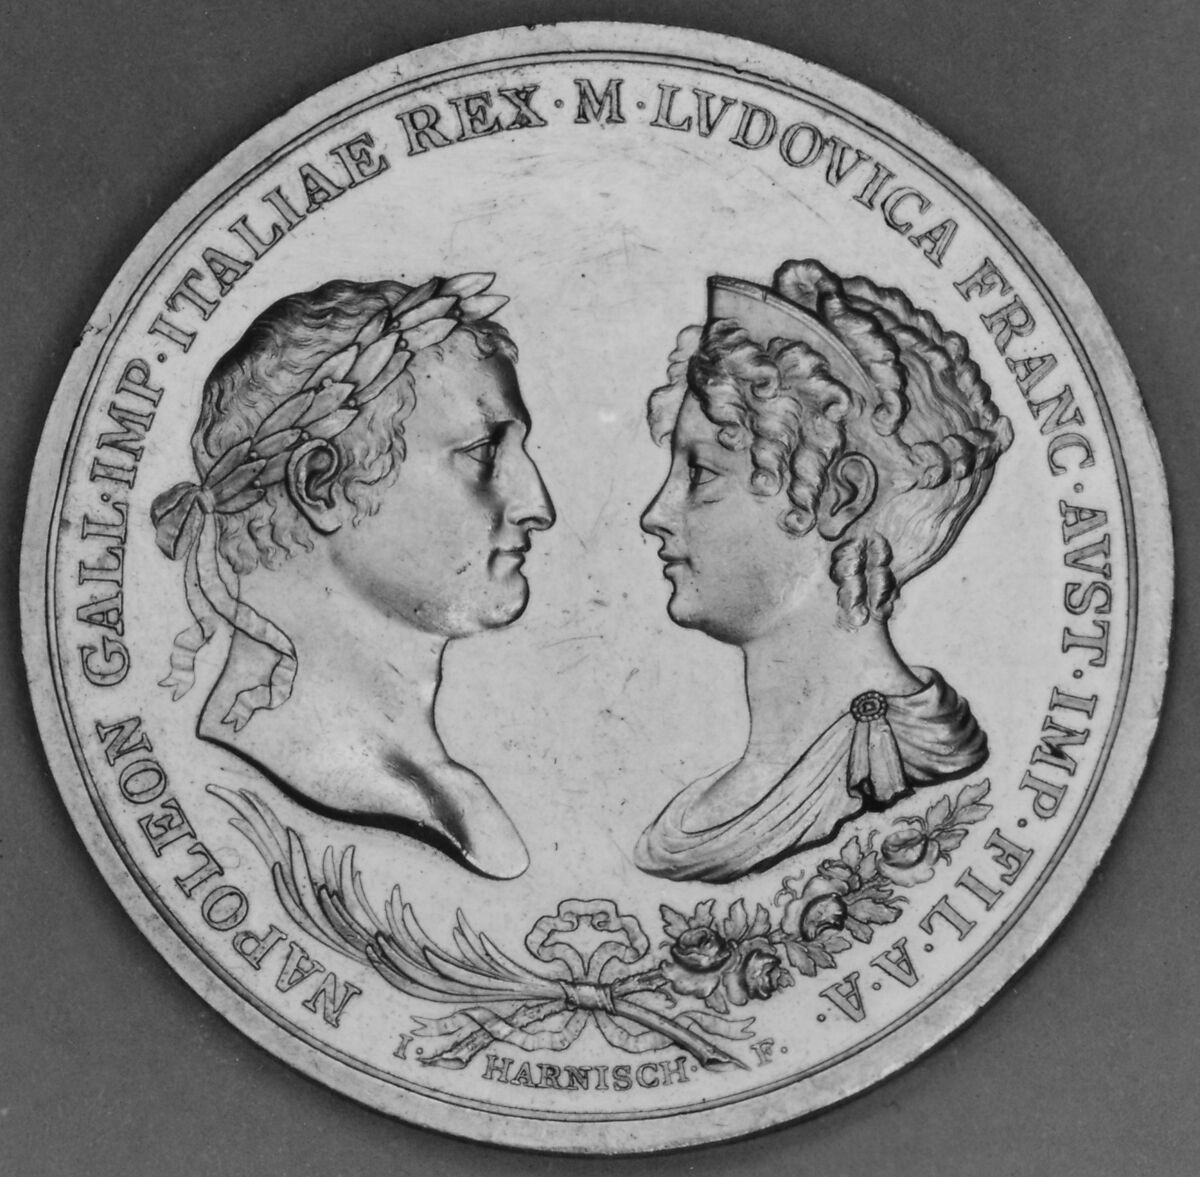 Commemorating Marriage of Napoleon and Marie Louise, Medalist (obverse): Johann Baptist Harnisch (Austrian, 1785–1833), Gold, Austrian 